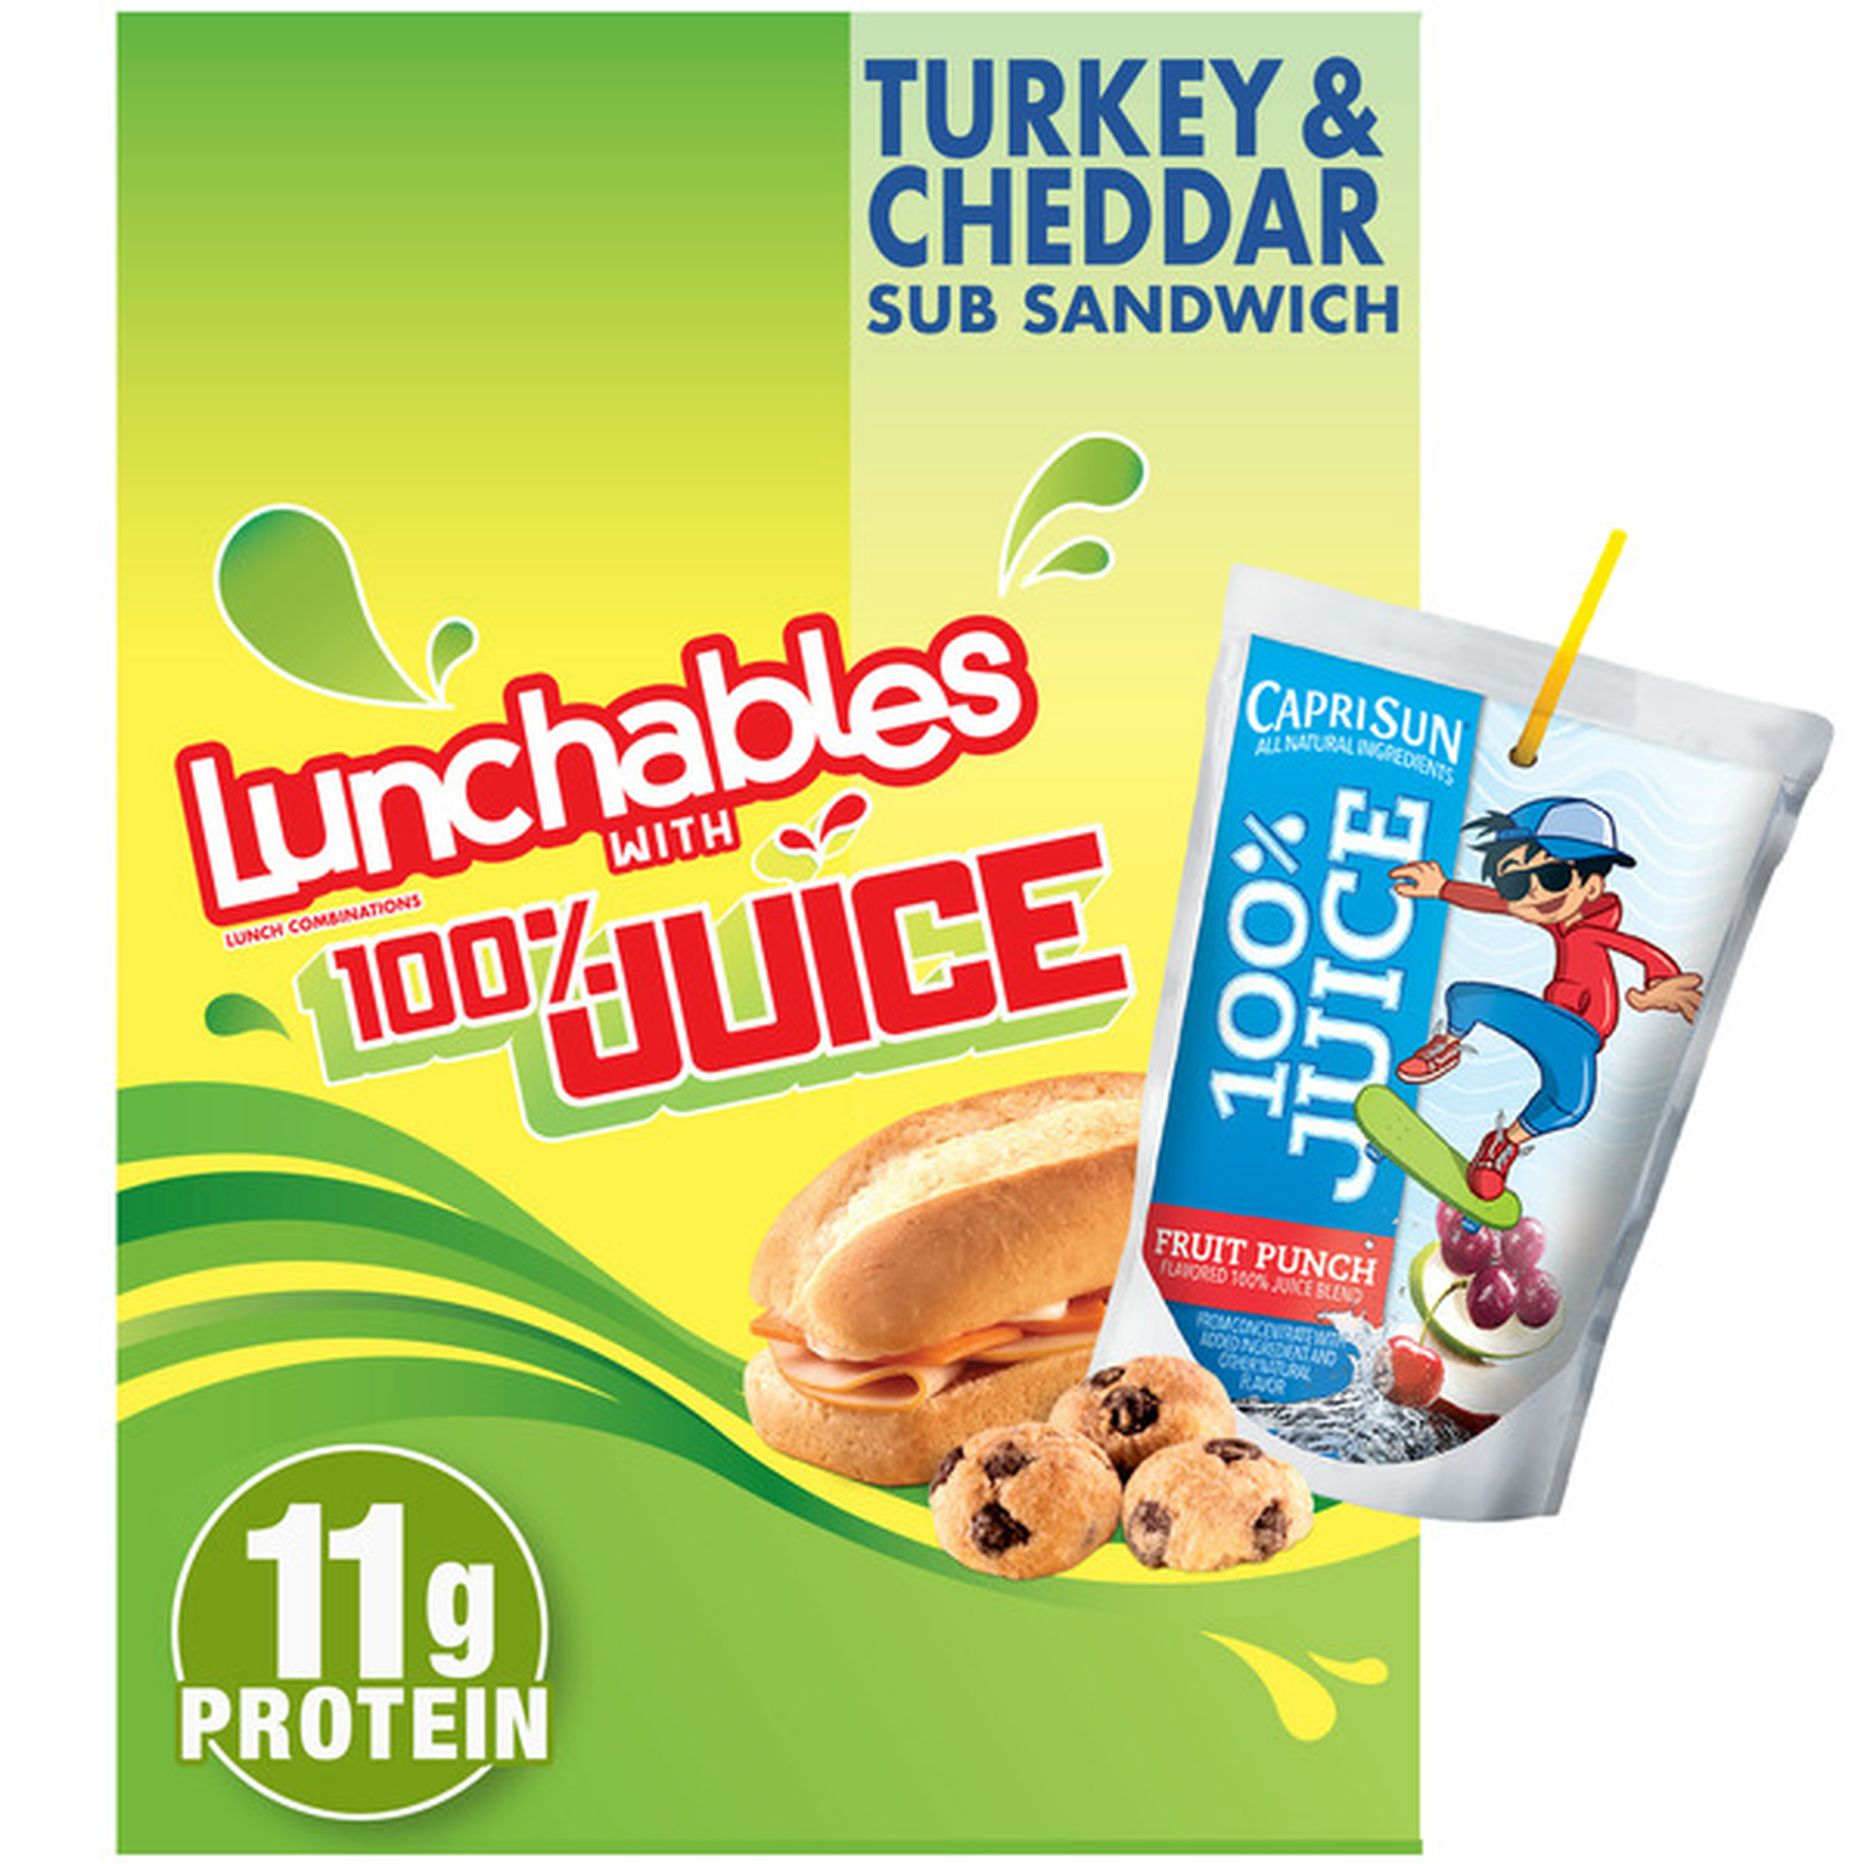 Lunchables Lunch Combinations, with 100 Juice, Turkey & Cheddar Sub